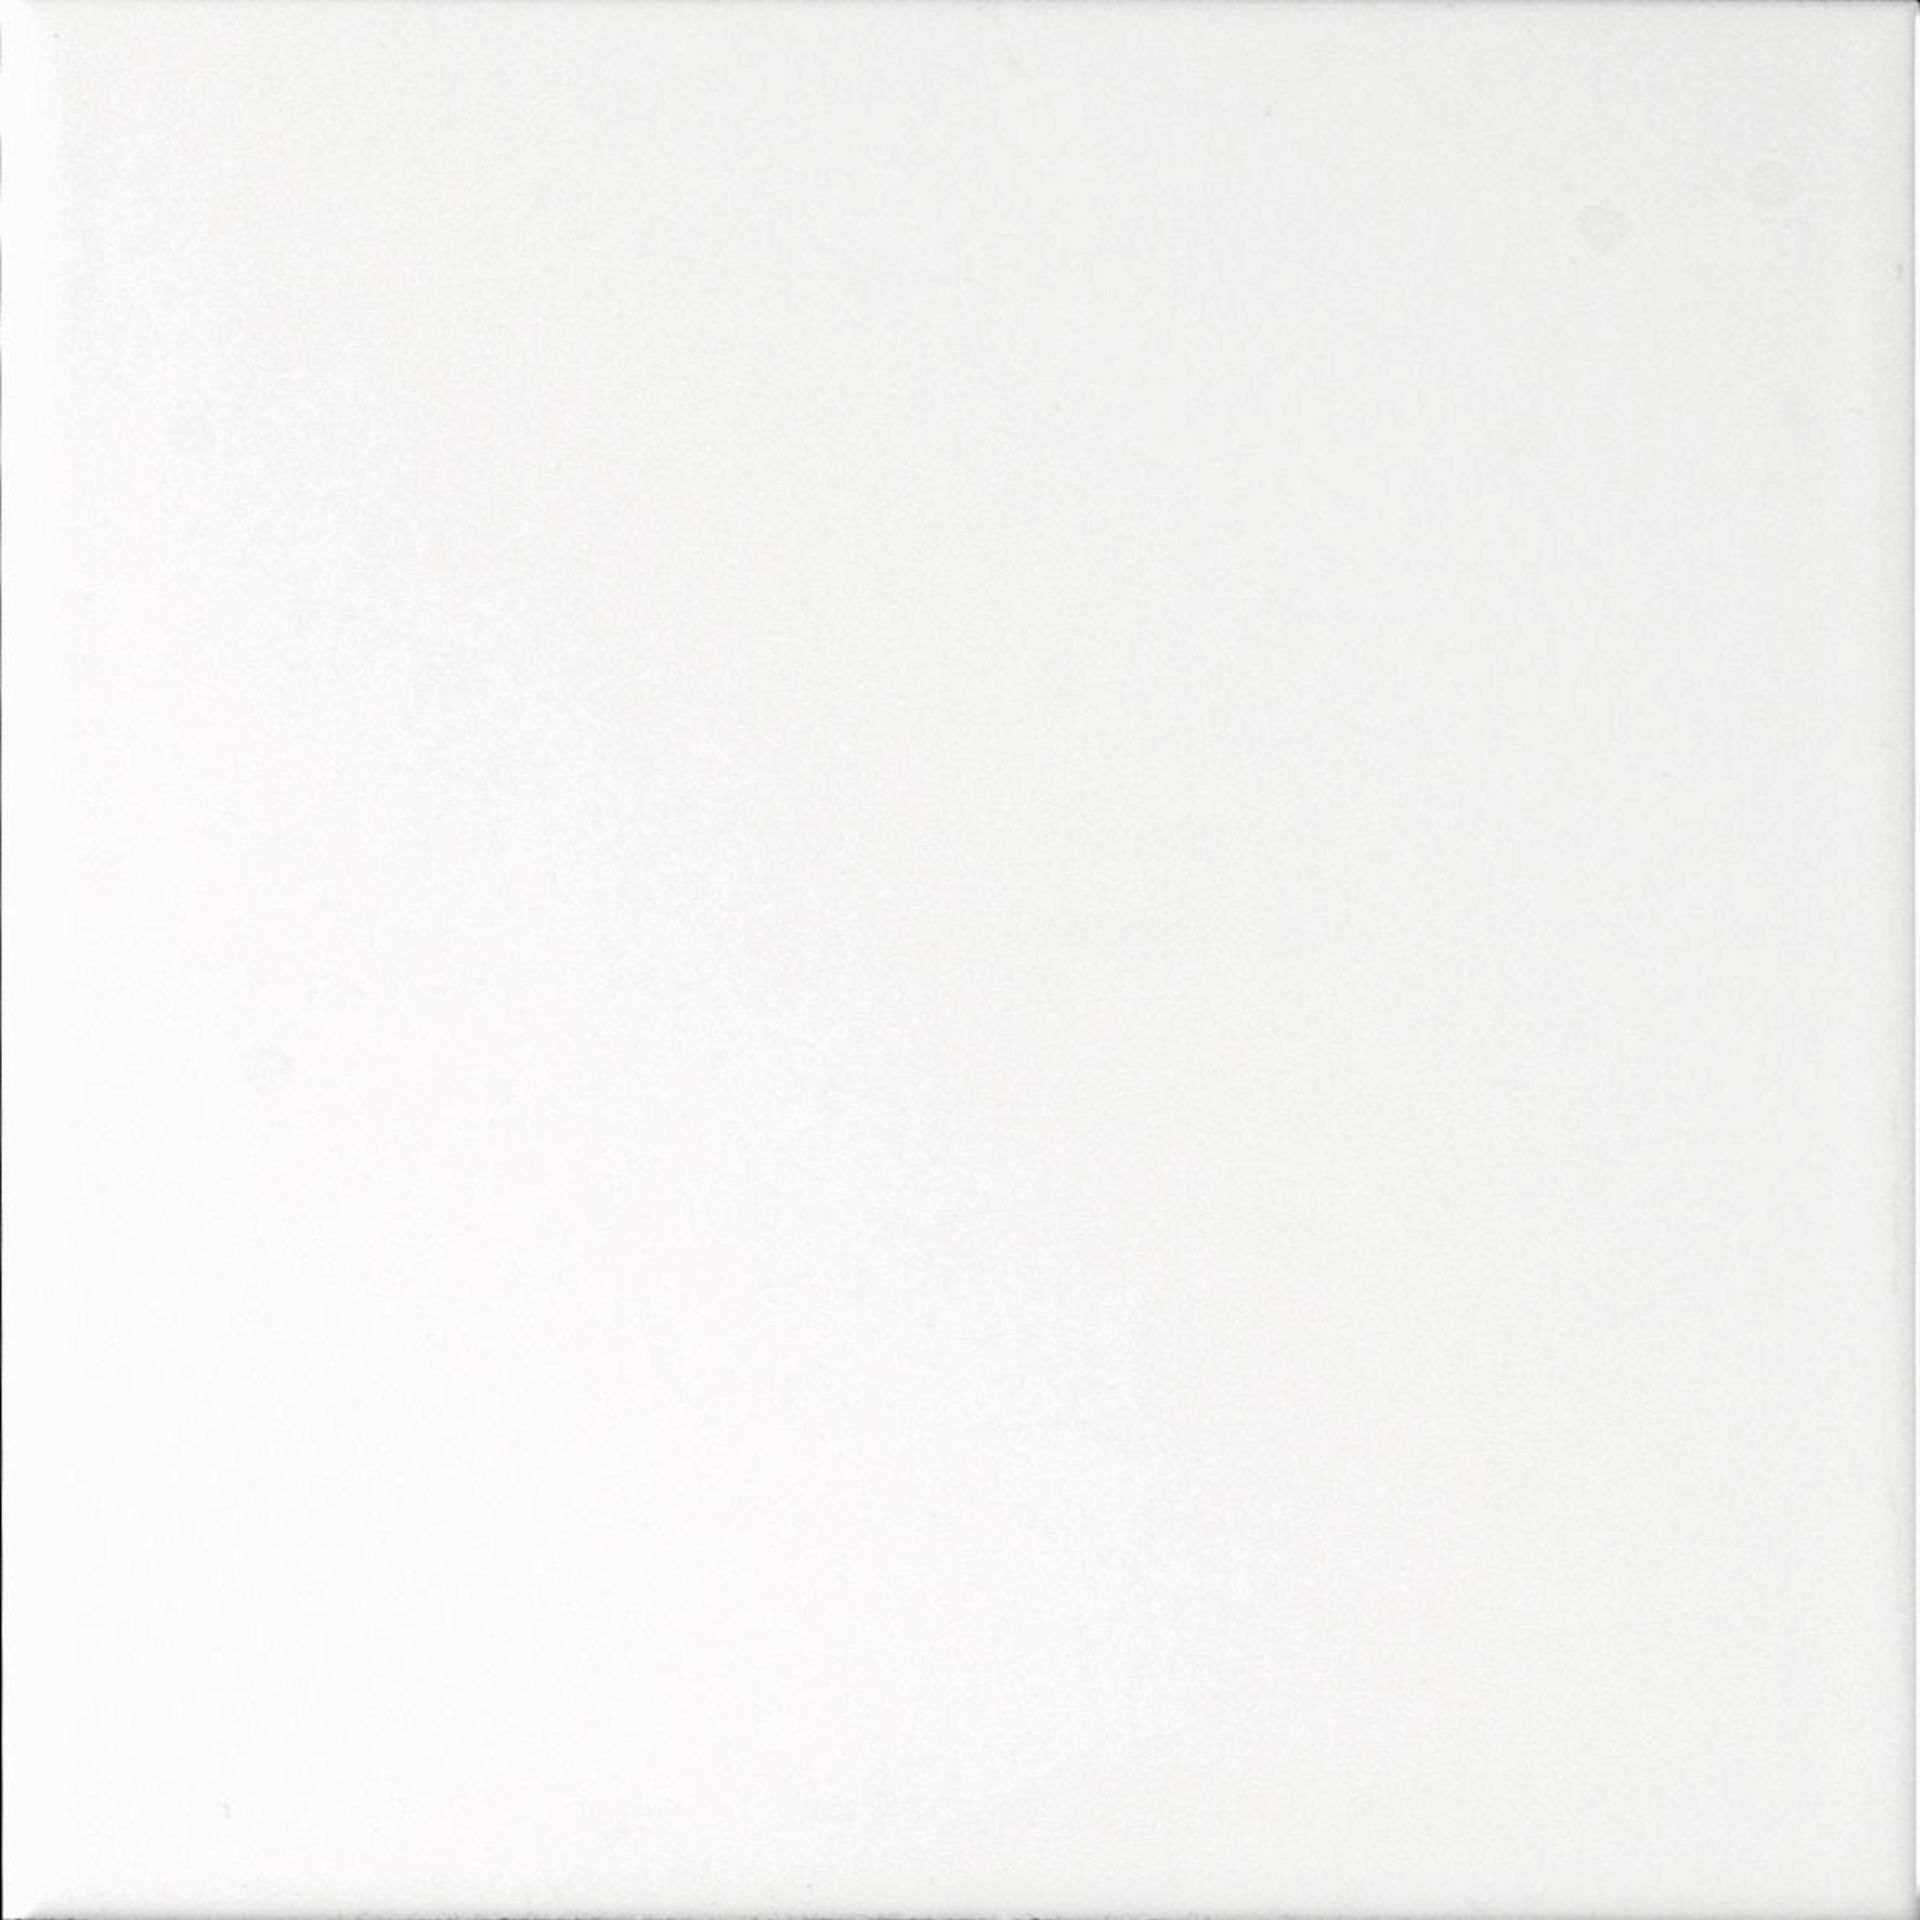 Brand New 6m2 150x150mm White Square Procelian Wall Tiles. White tiles are an essential product that - Image 3 of 5